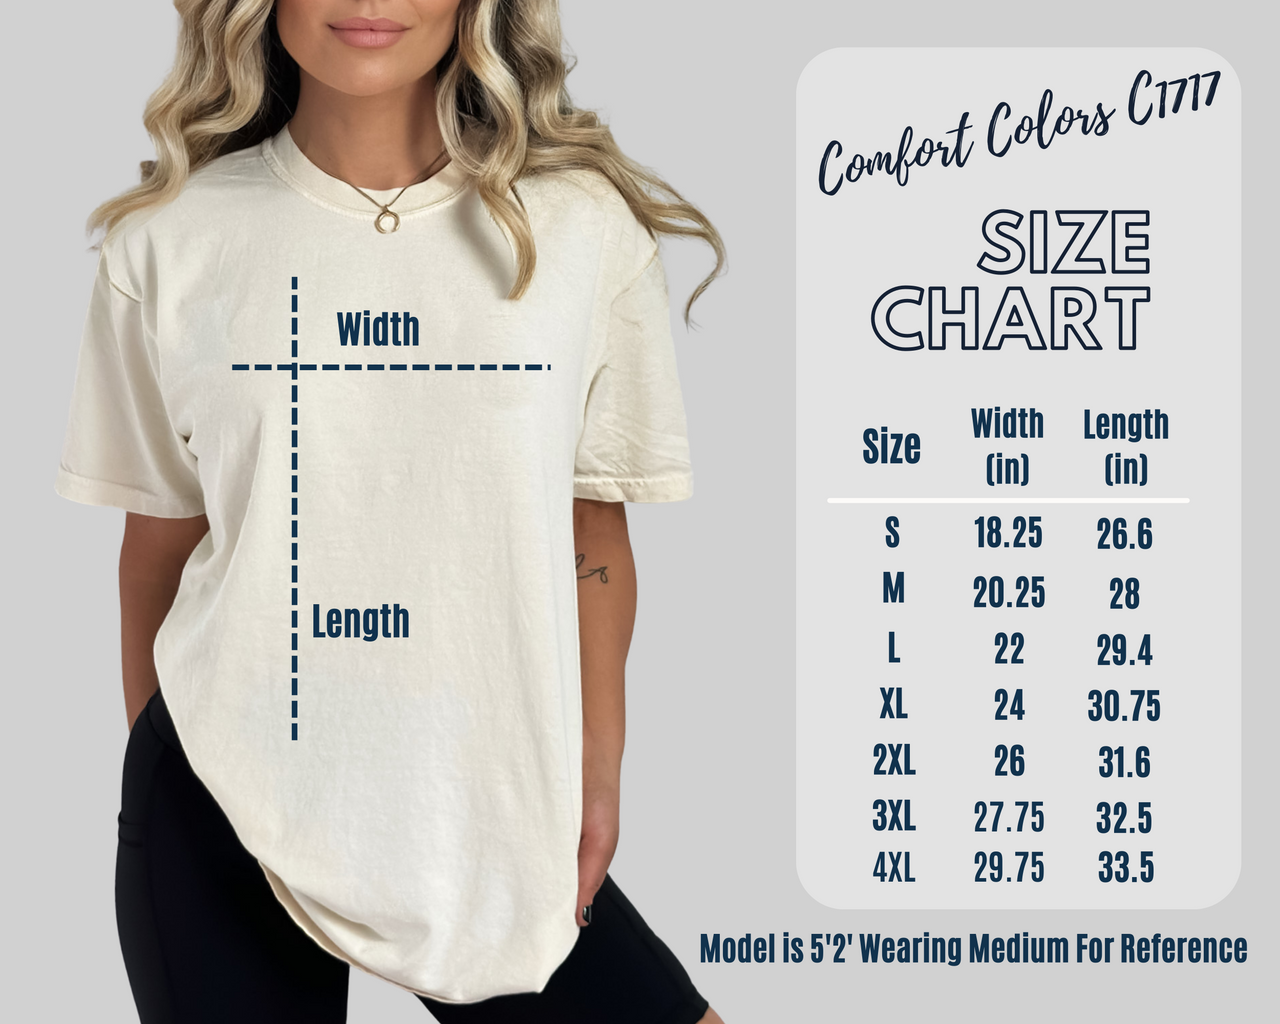 Comfort Colors 1717 Ivory Adult Heavyweight Rs T Shirt